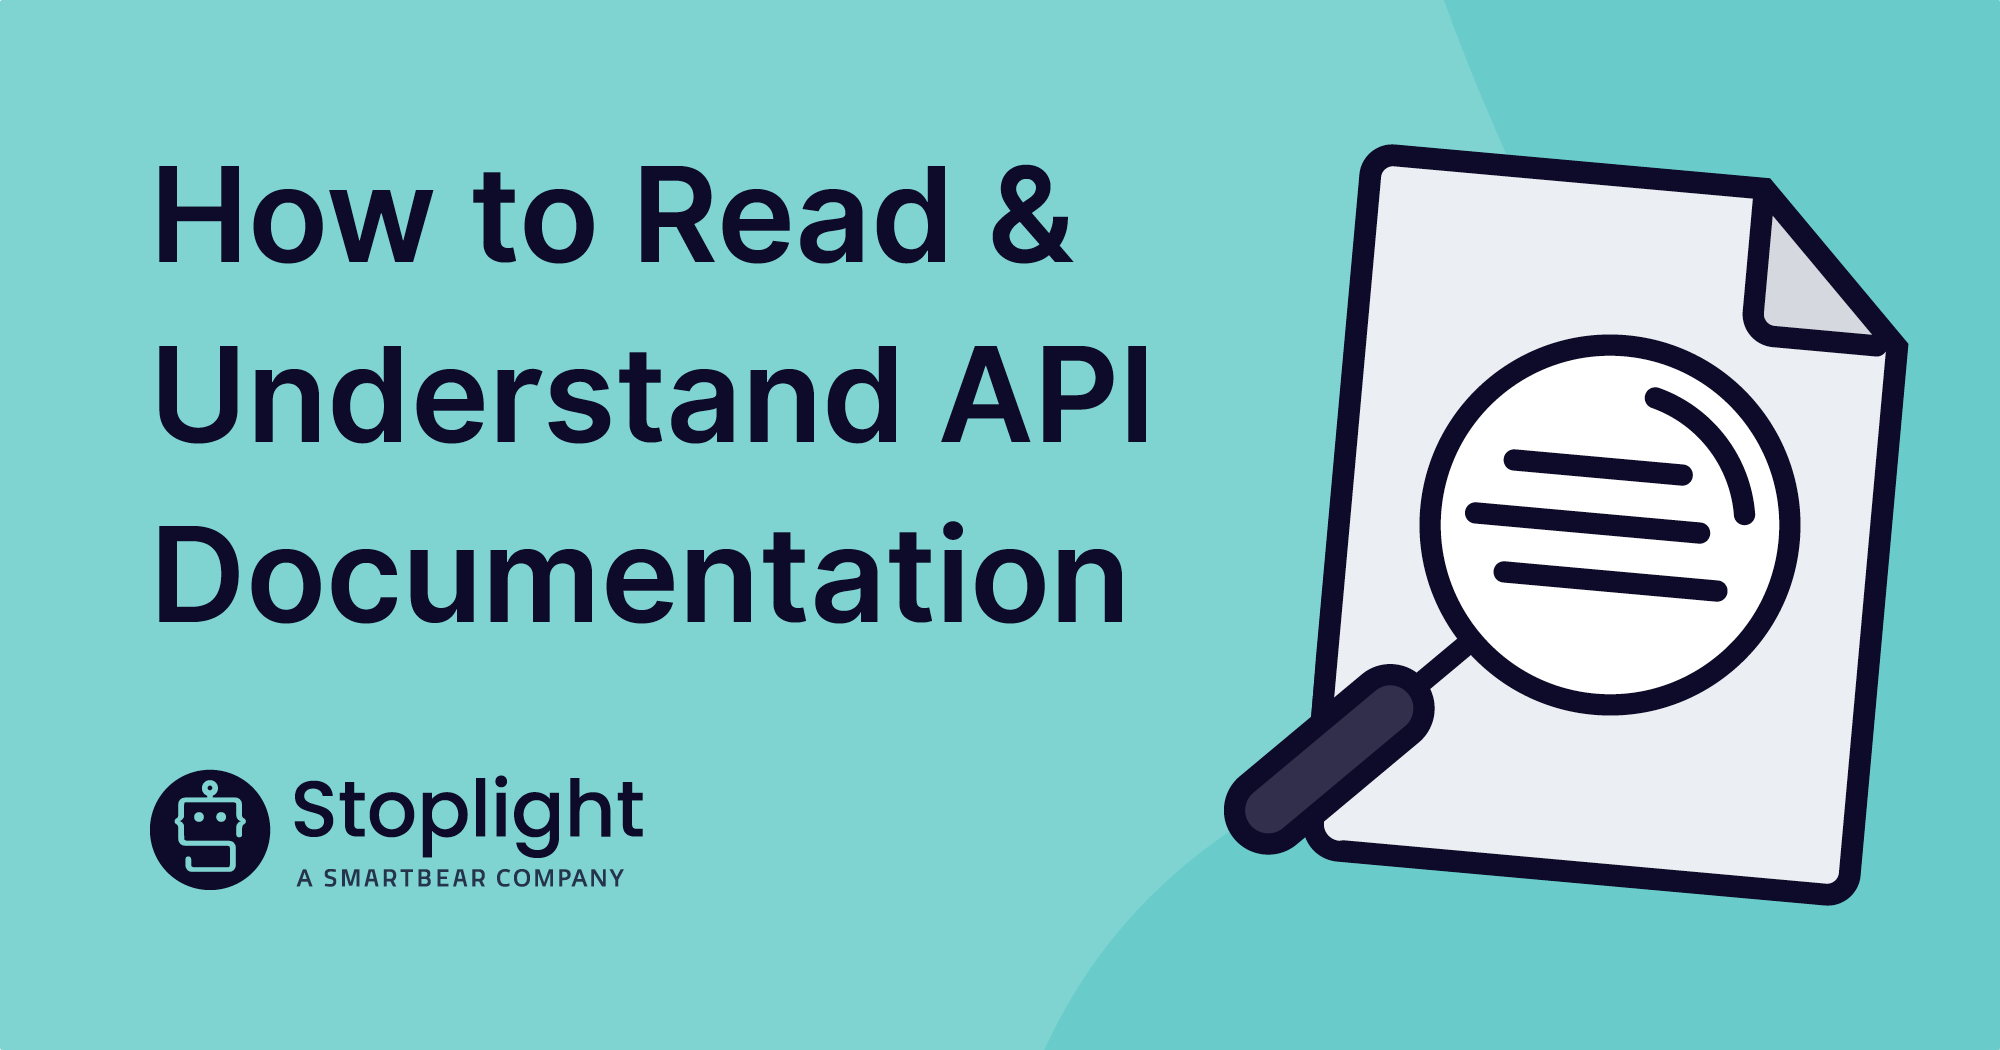 How to Read & Understand API Documentation